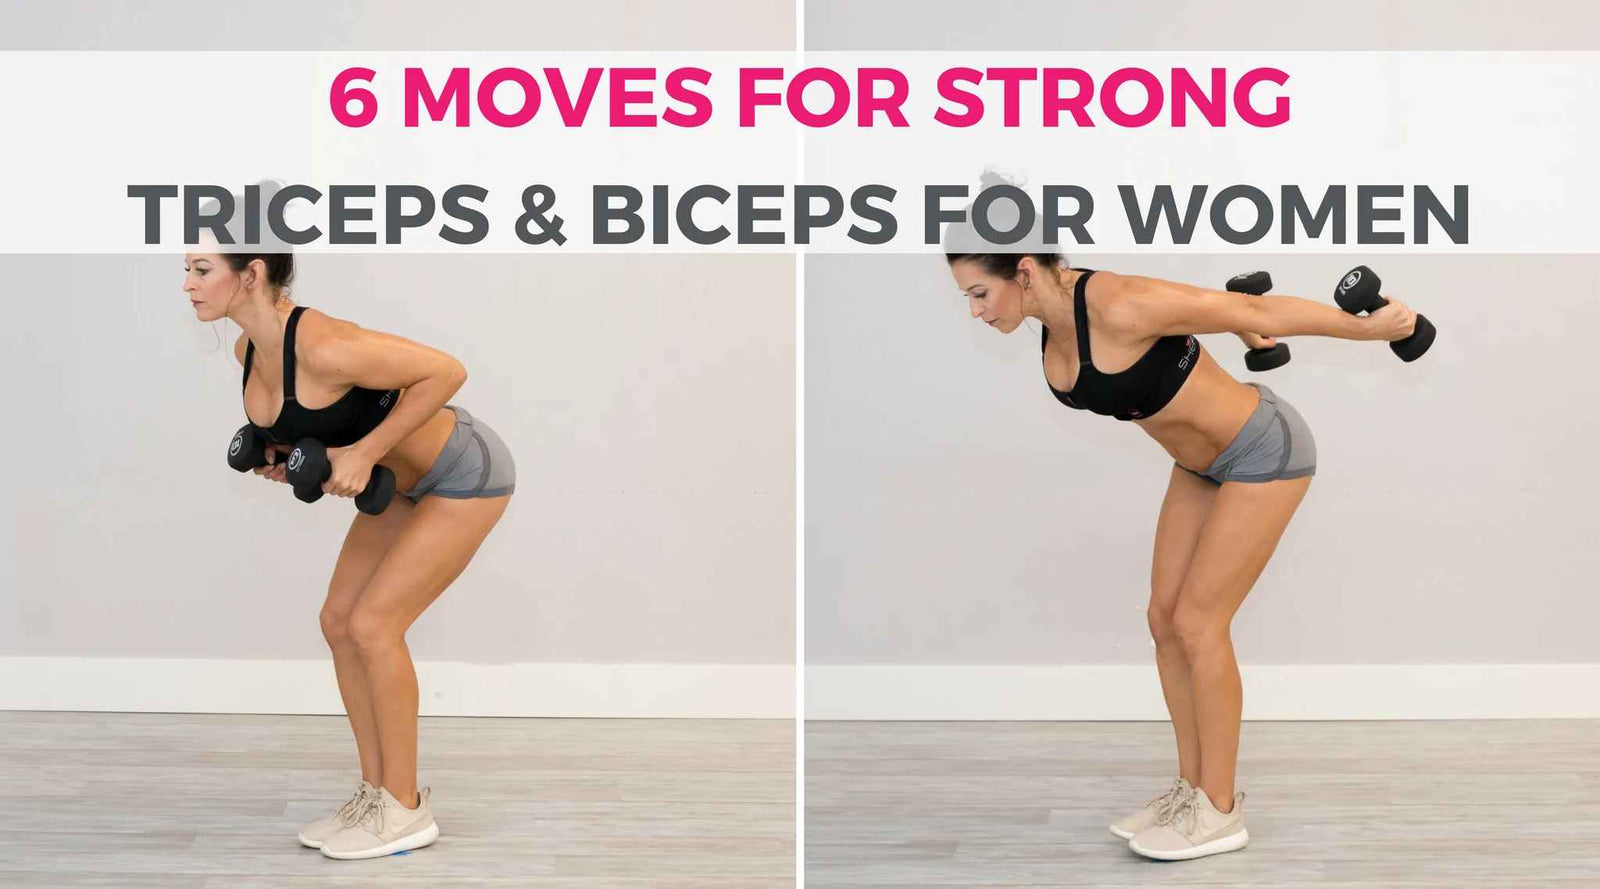 A 5-Minute Total Arm & Shoulder Workout With Home Essentials (As Seen On  The Today